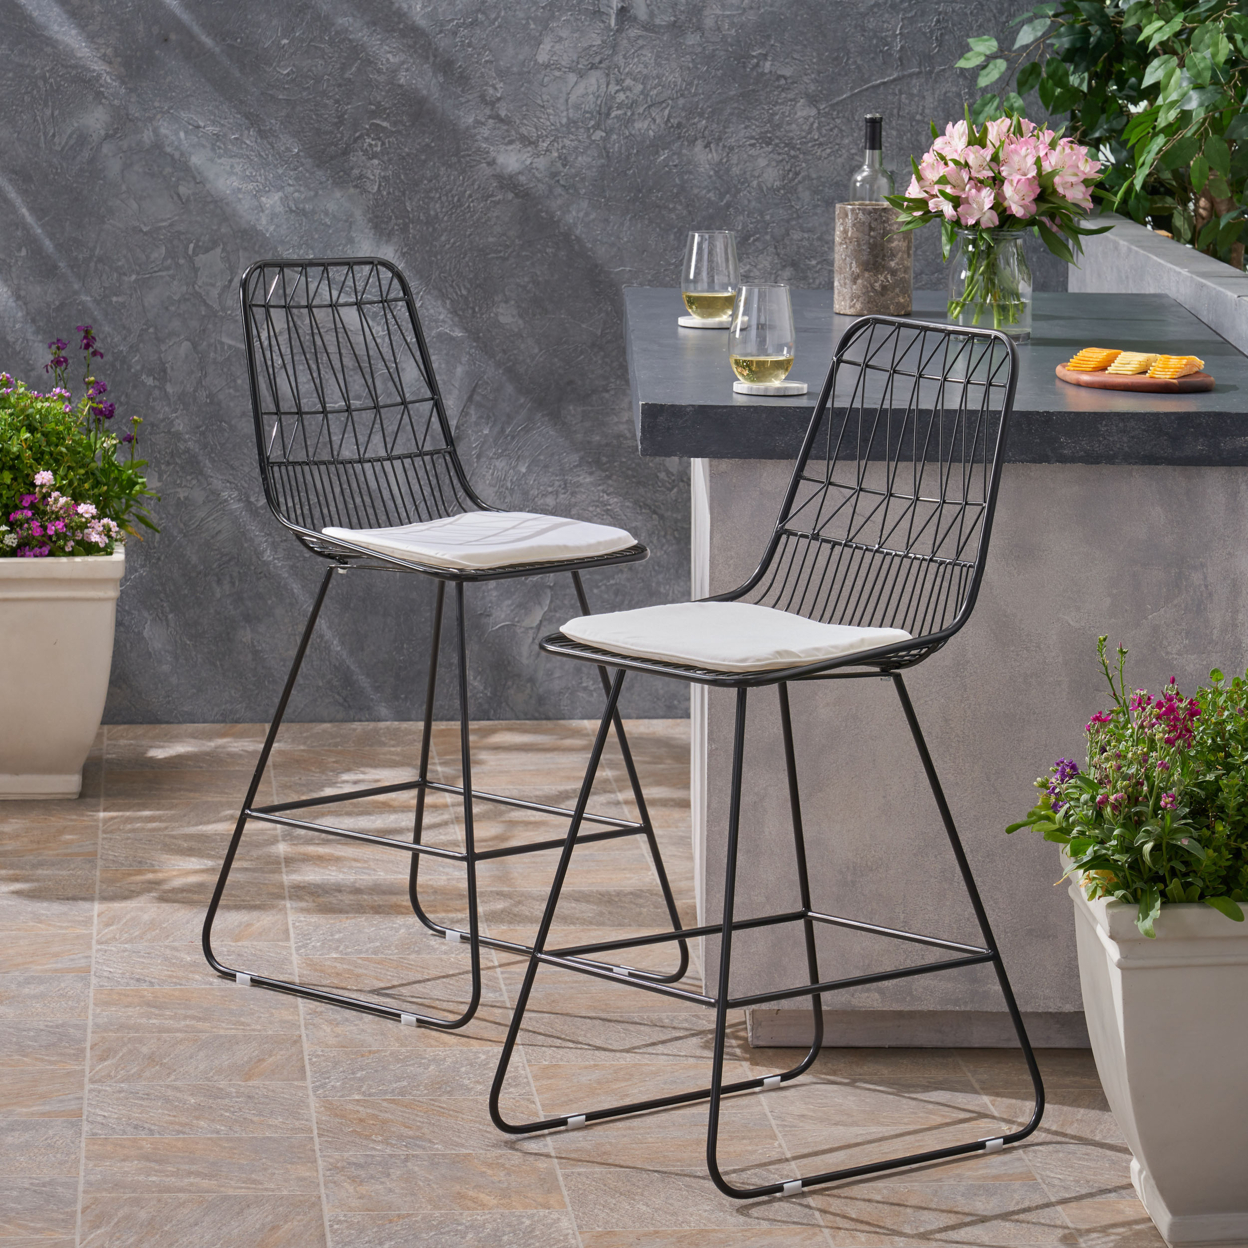 Hedy Outdoor 26 Seats Iron Counter Stools With Cushions (Set Of 2) - Black